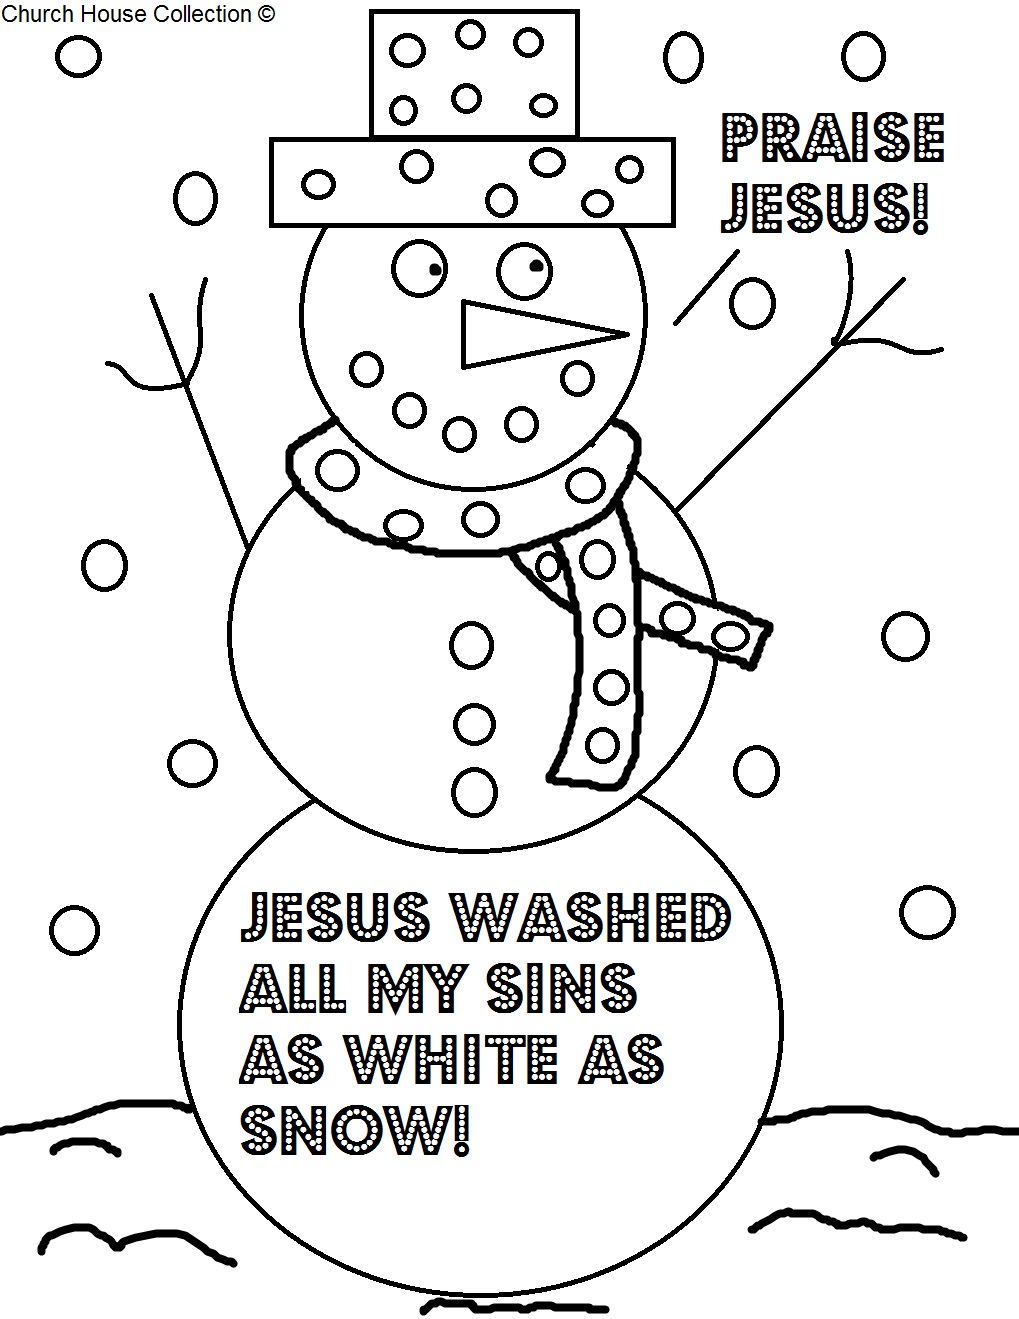 Church House Collection Blog Christmas Coloring Page For Sunday School 